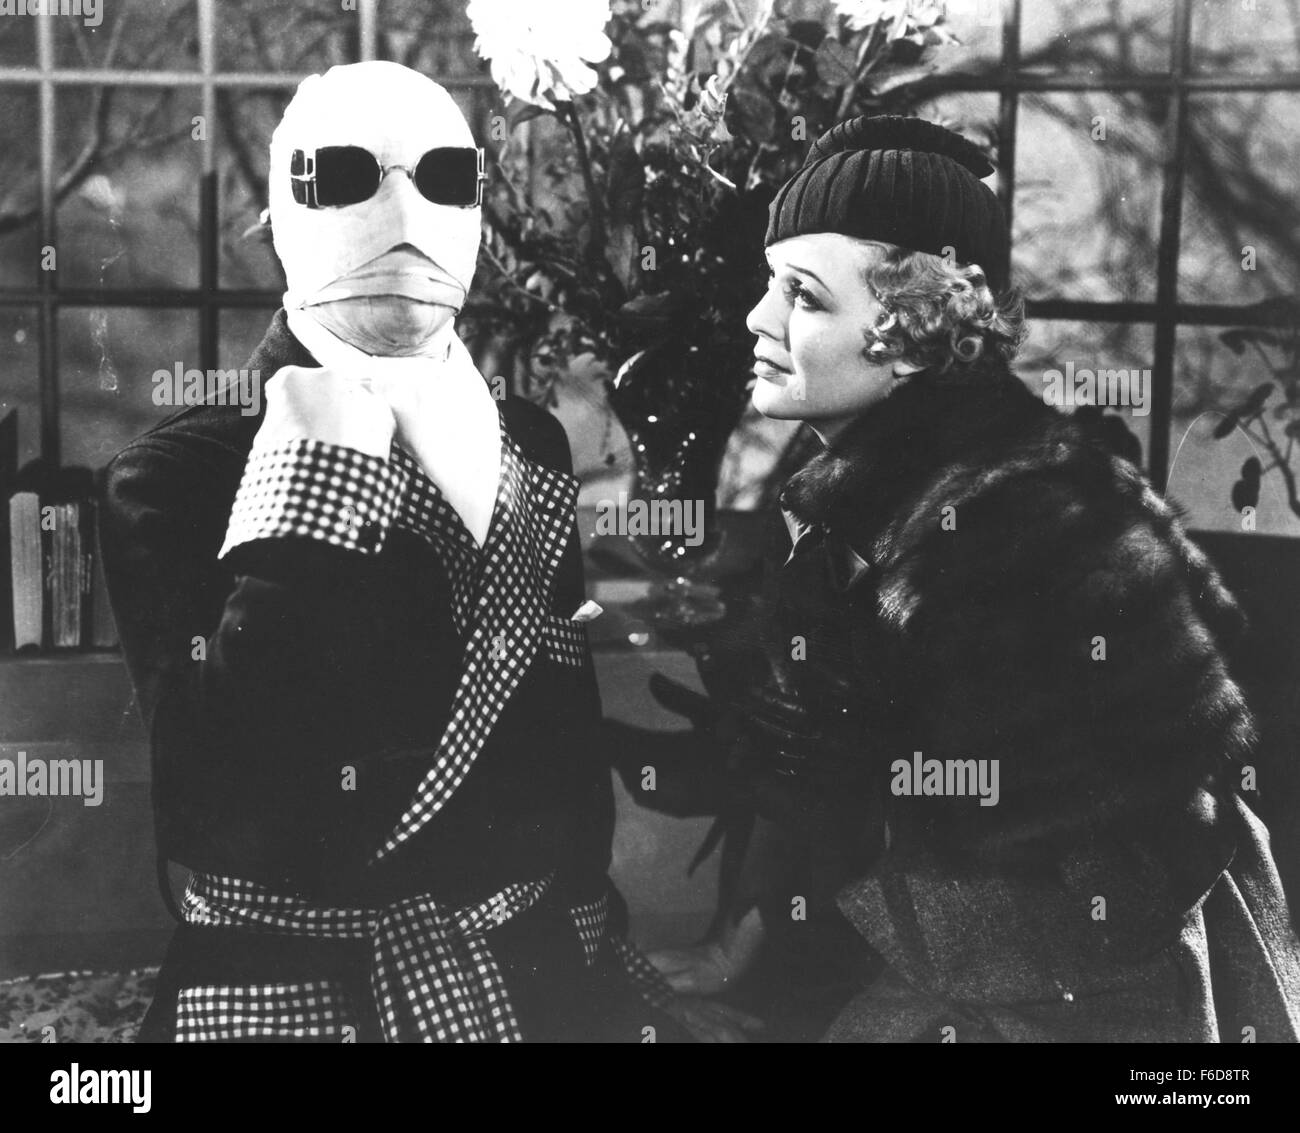 RELEASE DATE: November 13, 1933. MOVIE TITLE: The Invisible Man. STUDIO: Universal Pictures. PLOT: A mysterious man, whose head is completely covered in bandages, wants a room. The proprietors of the pub aren't used to making their house an inn during the winter months, but the man insists. They soon come to regret their decision. The man quickly runs out of money, and he has a violent temper besides. Worse still, he seems to be some kind of chemist and has filled his room with messy chemicals, test tubes, beakers and the like. When they try to throw him out, they make a ghastly discovery. Mea Stock Photo